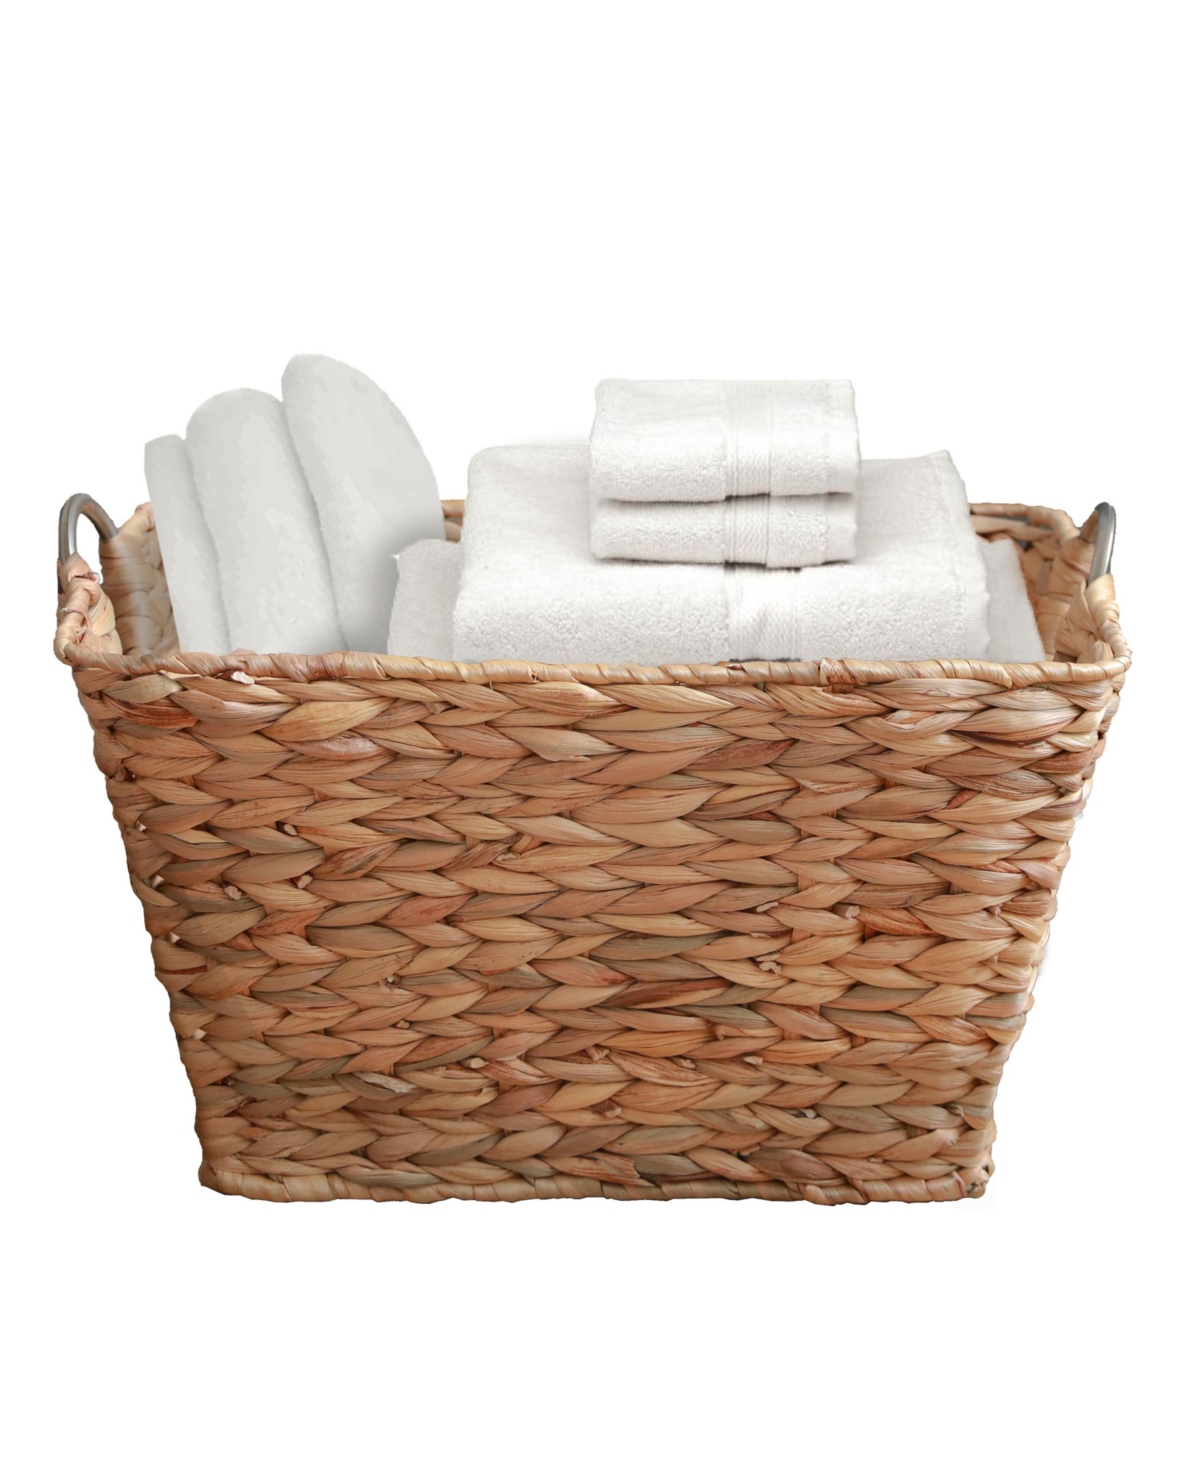 Water Hyacinth Wicker Large Square Storage Laundry Basket with Handles - Natural